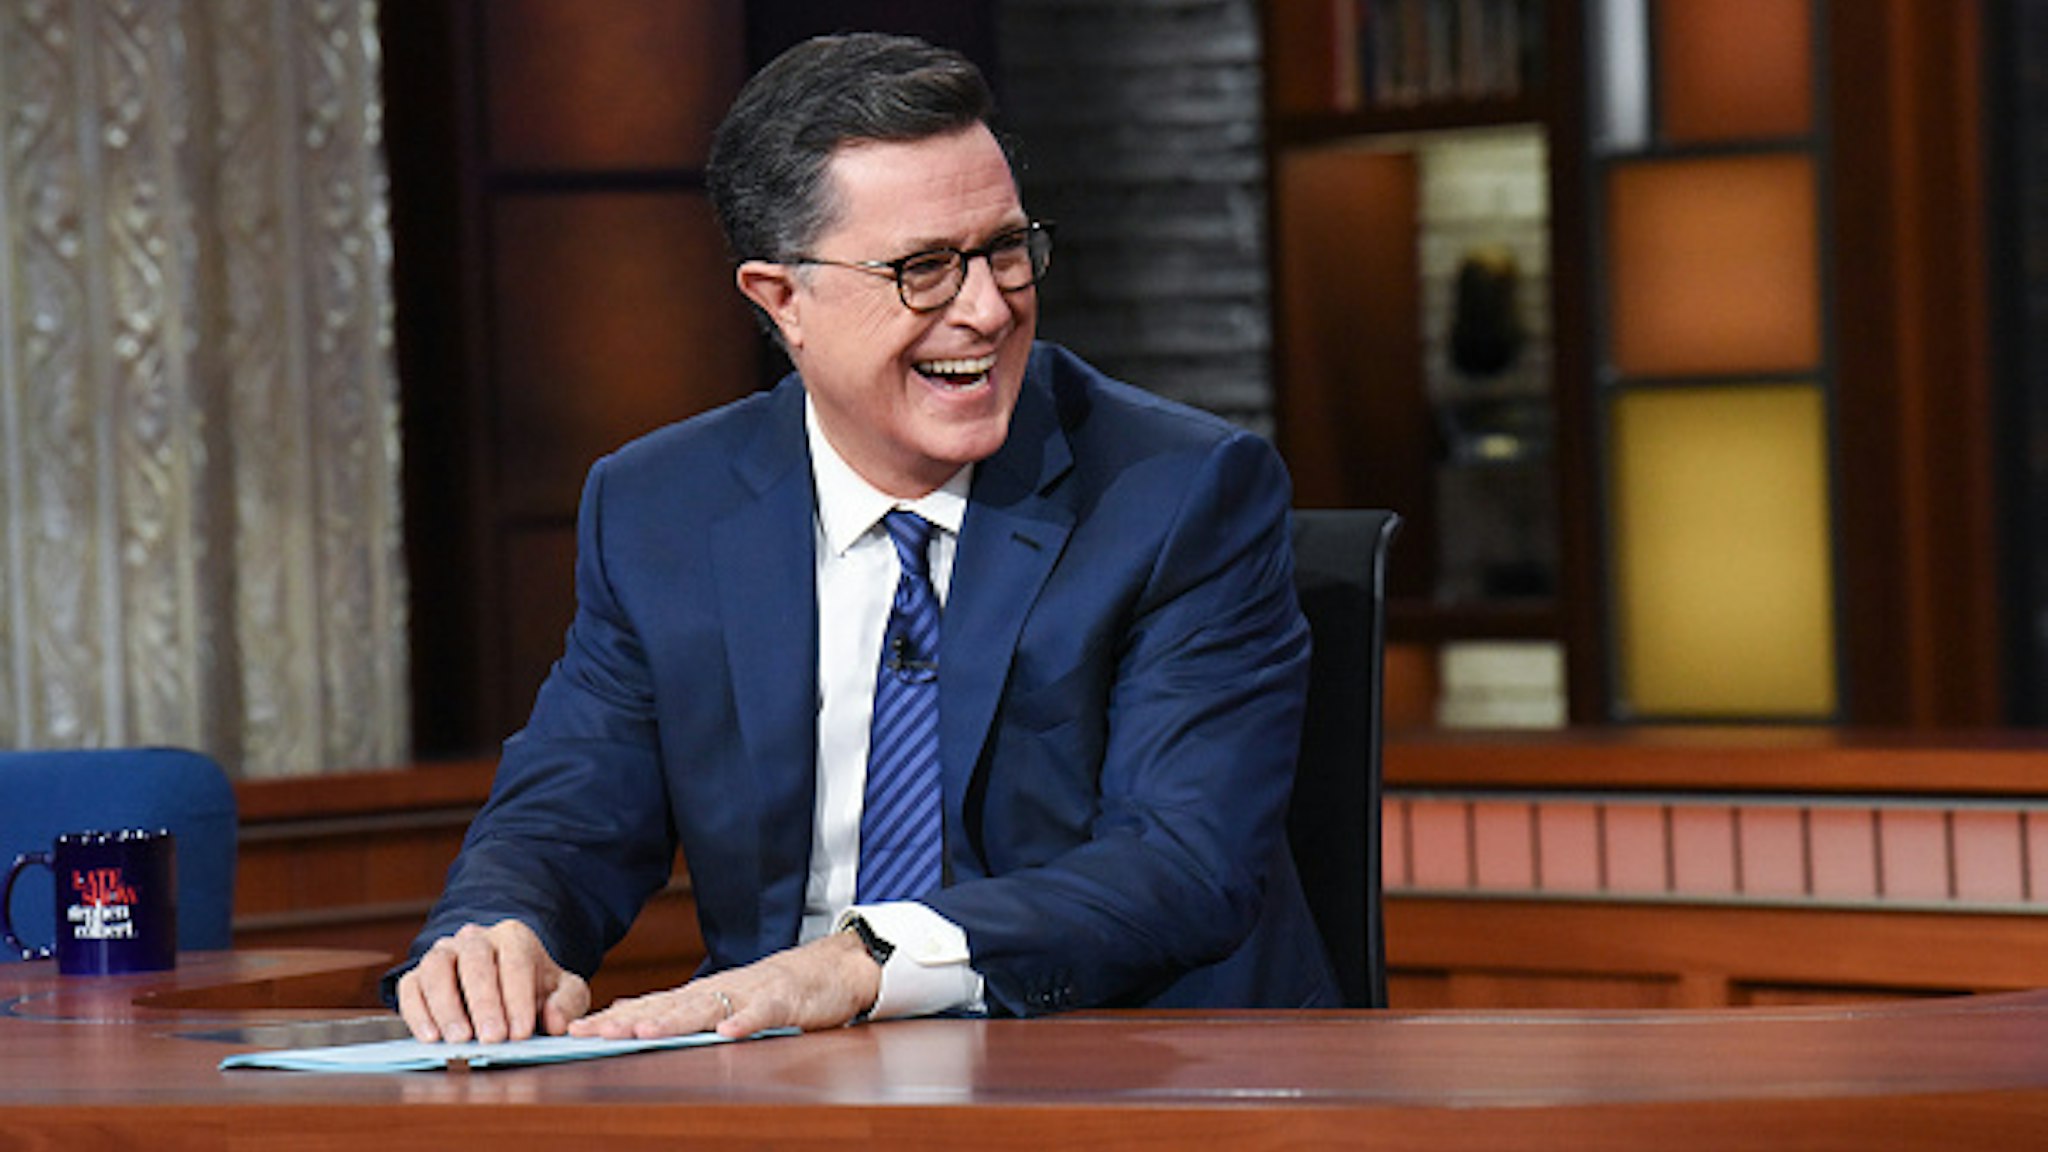 NEW YORK - OCTOBER 23: The Late Show with Stephen Colbert during Wednesday's October 23, 2019 show.